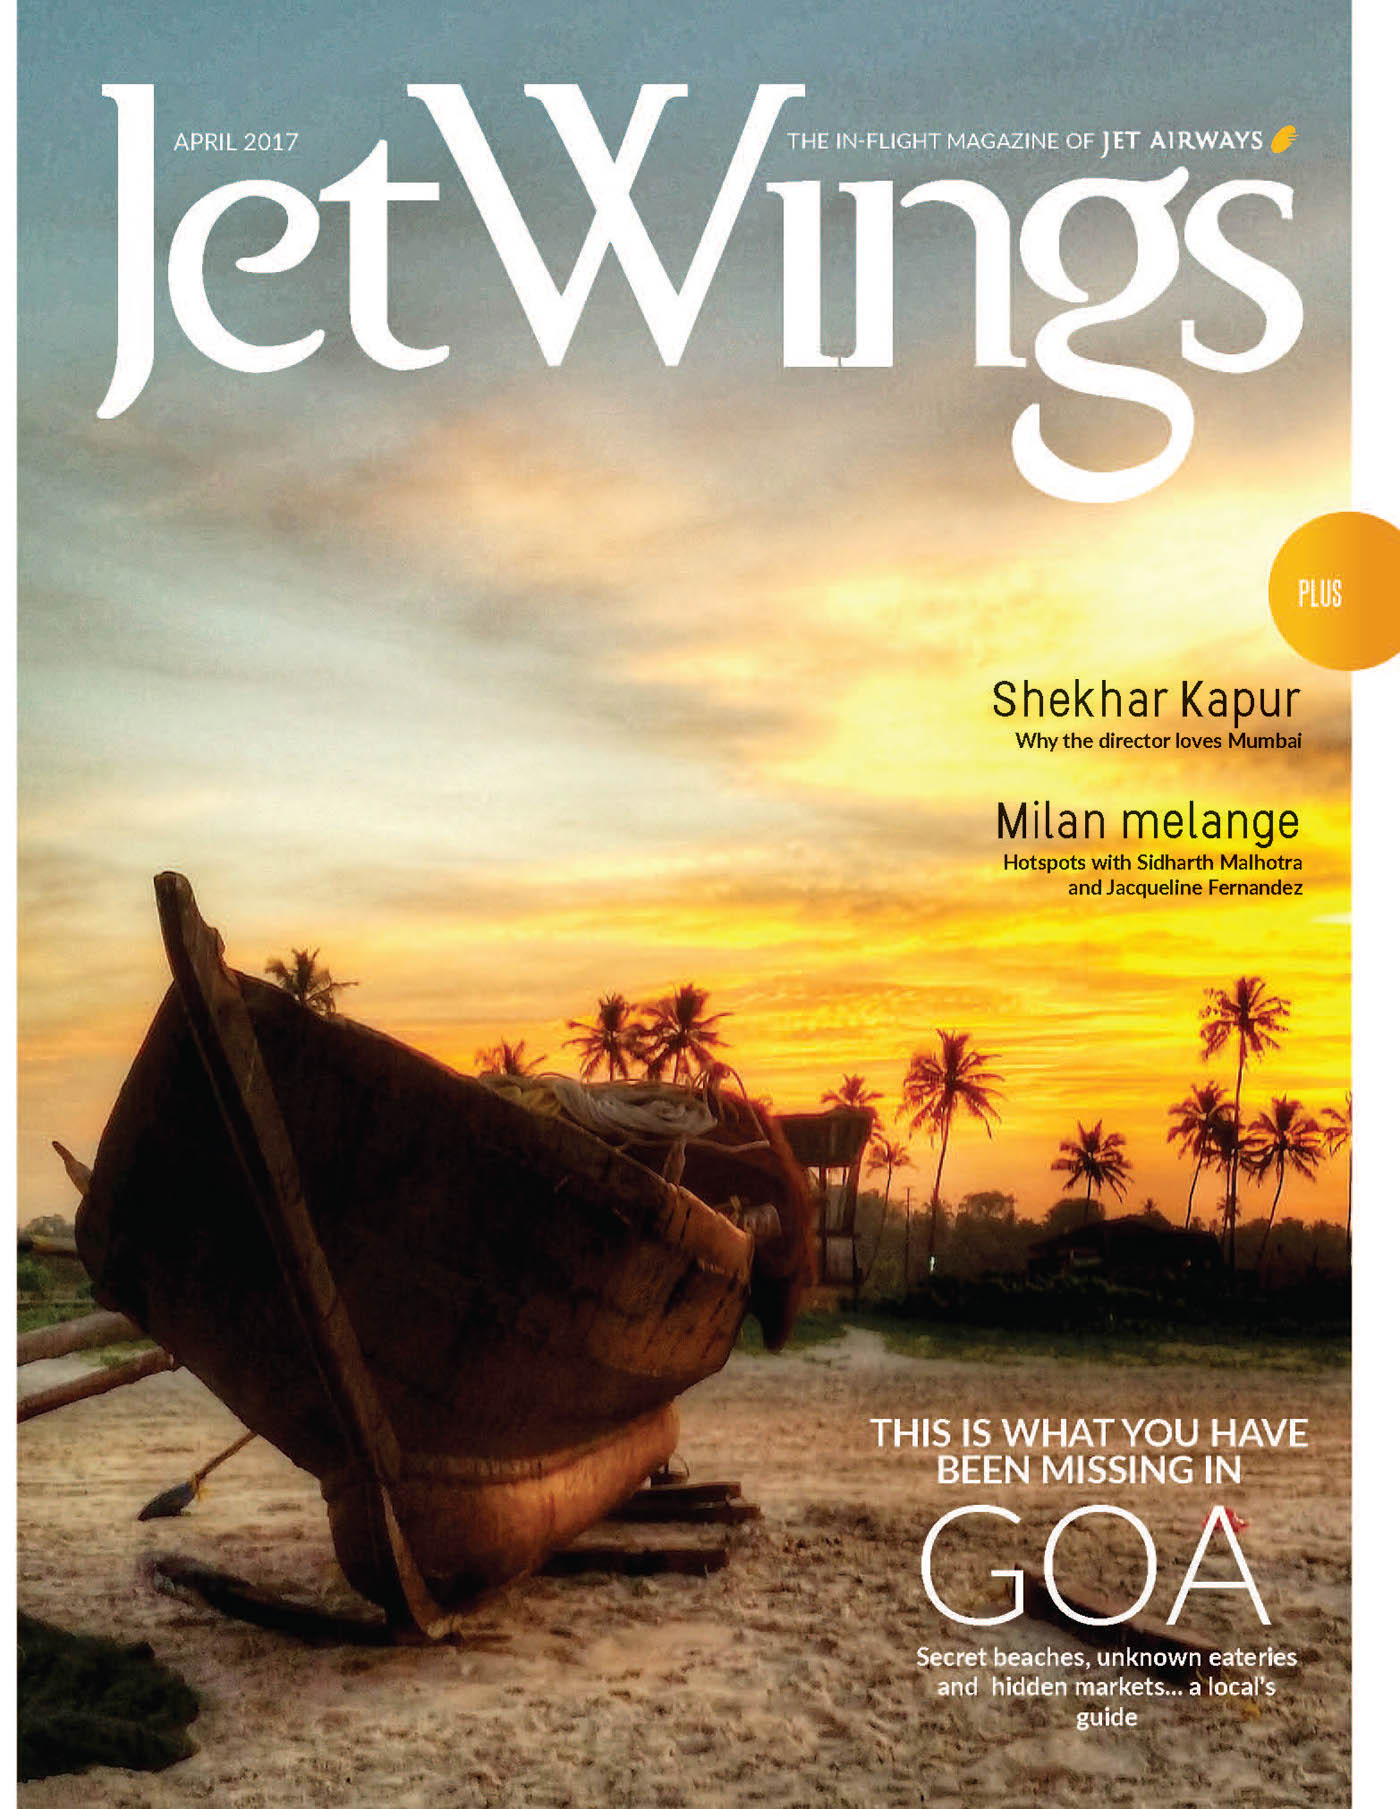 Jetwings Inflight Magazine Contact Number